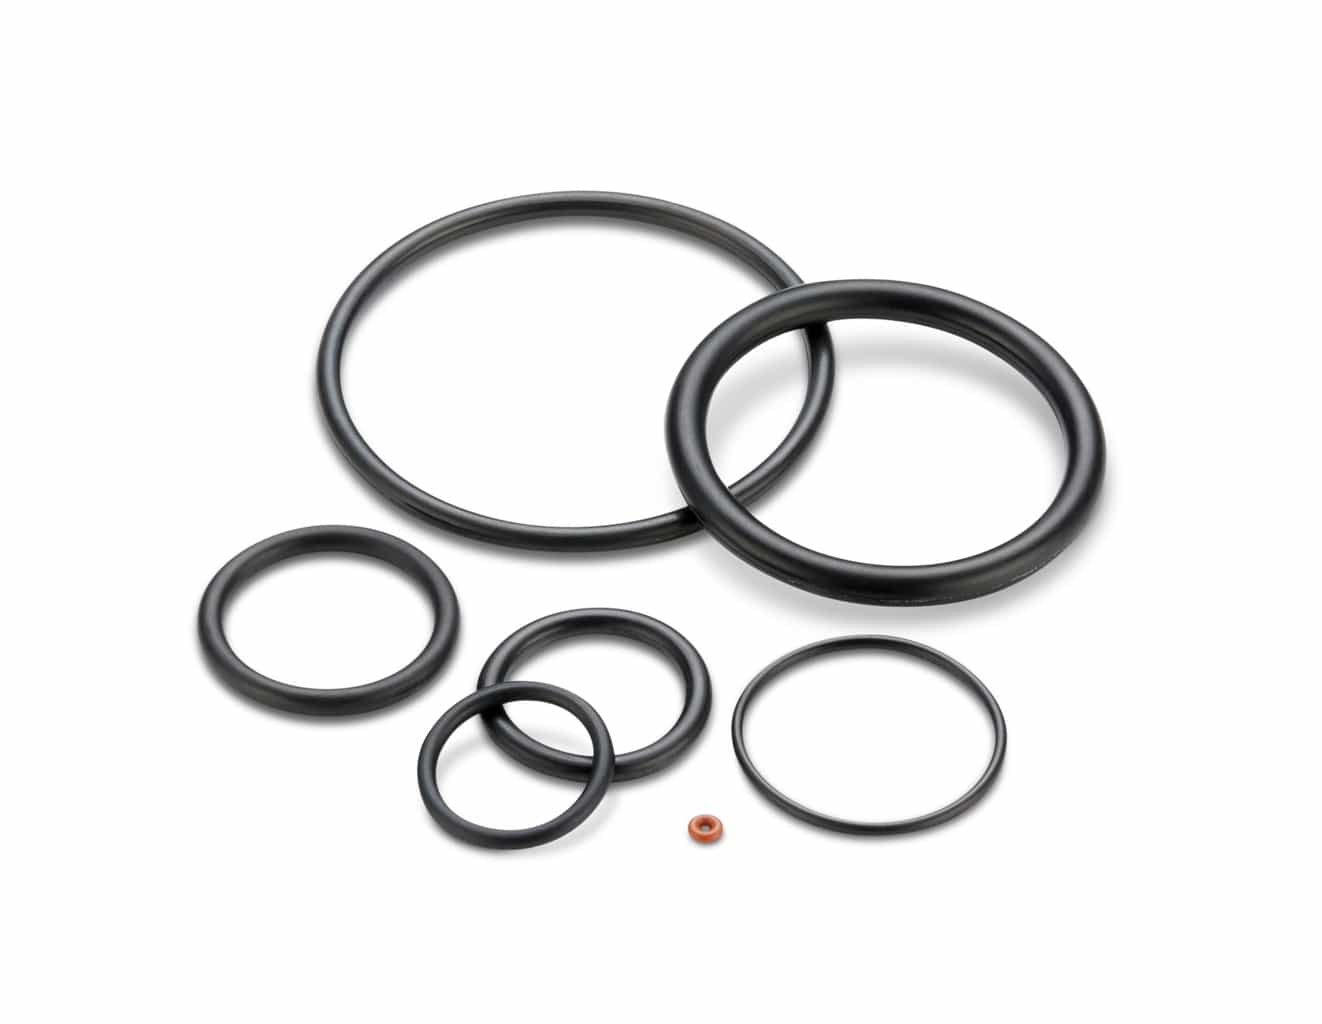 3mm Section 80mm Bore NITRILE 70 Rubber O-Rings 